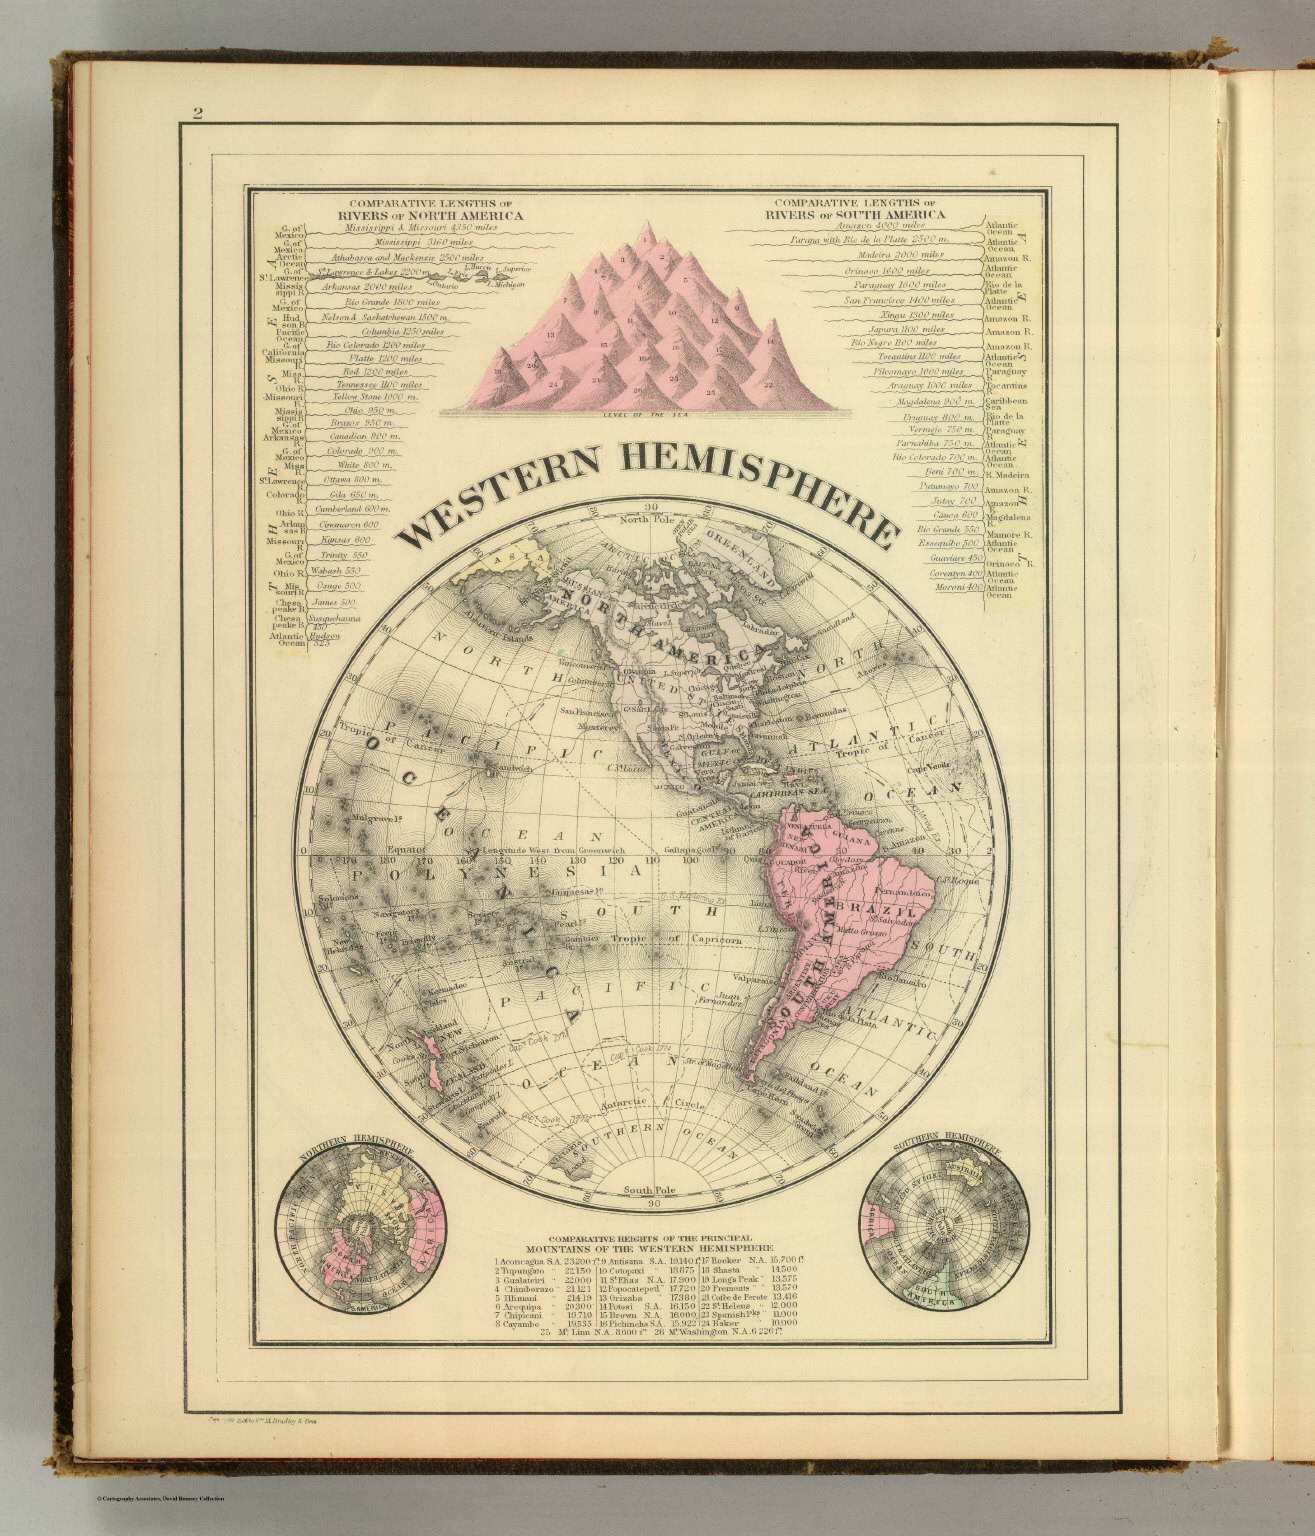 Western Hemisphere David Rumsey Historical Map Collection